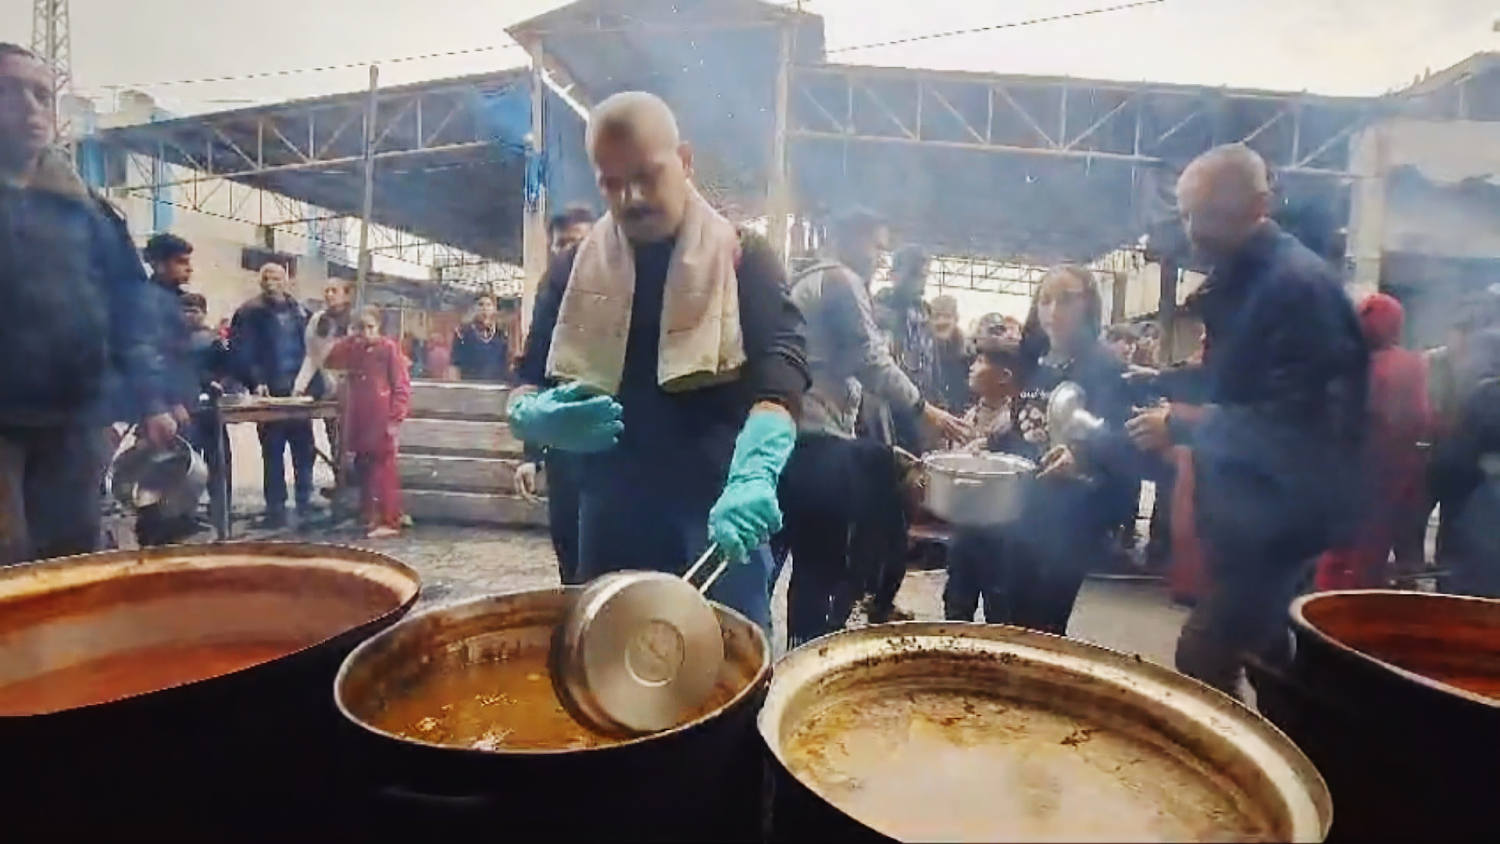 Gaza soup kitchen bridges efforts from brothers thousands of miles apart 